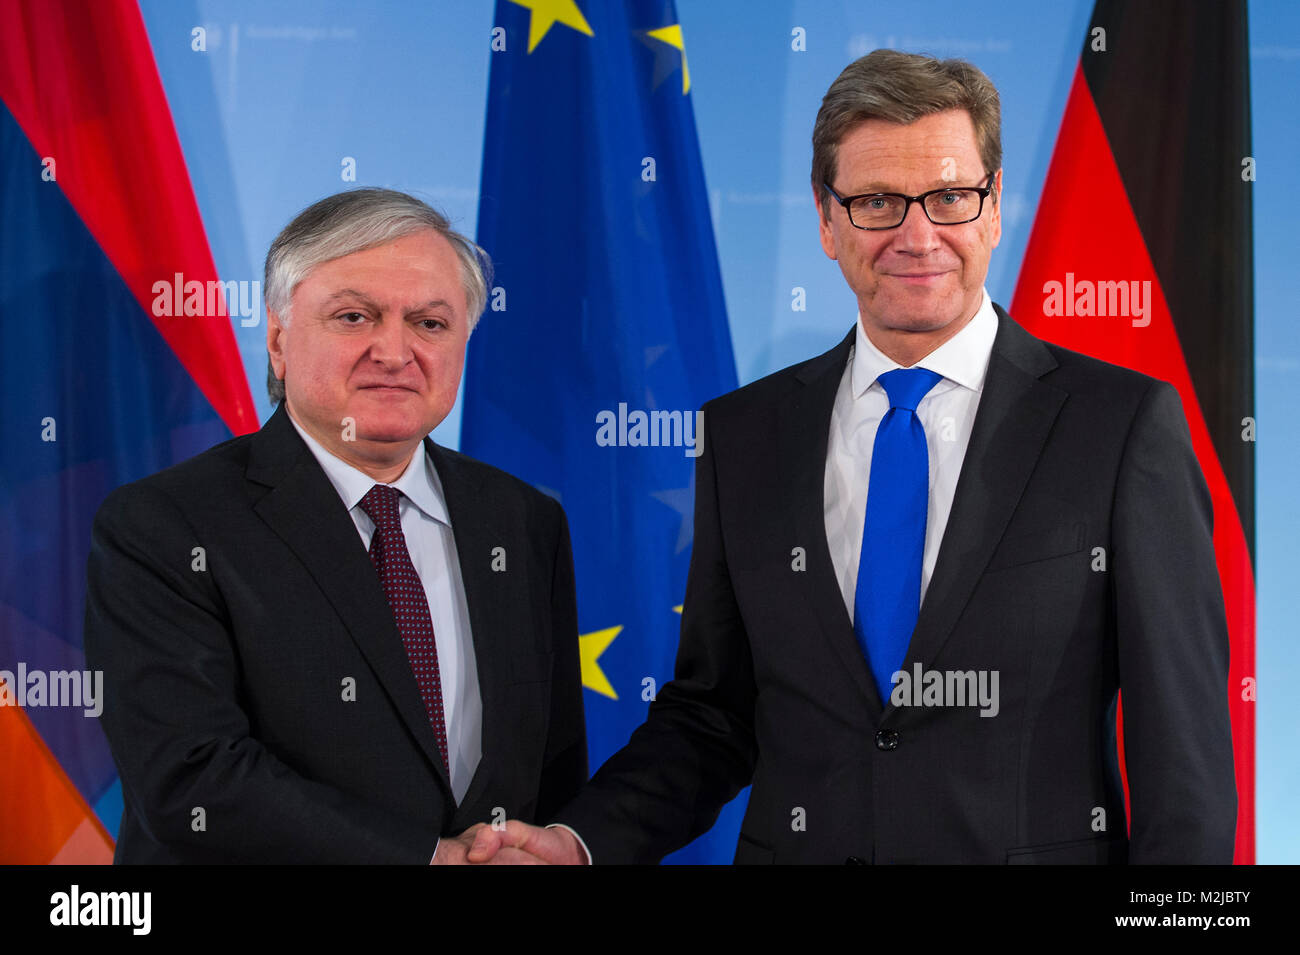 March 14th, Berlin - Germany. German Foreign Minister Guido Westerwelle receives  Armenian Foreign Minister Edward Nalbandian, to bilateral conversation and they talk about international issues. Credits: © Gonçalo Silva/Alamy Live News. Stock Photo